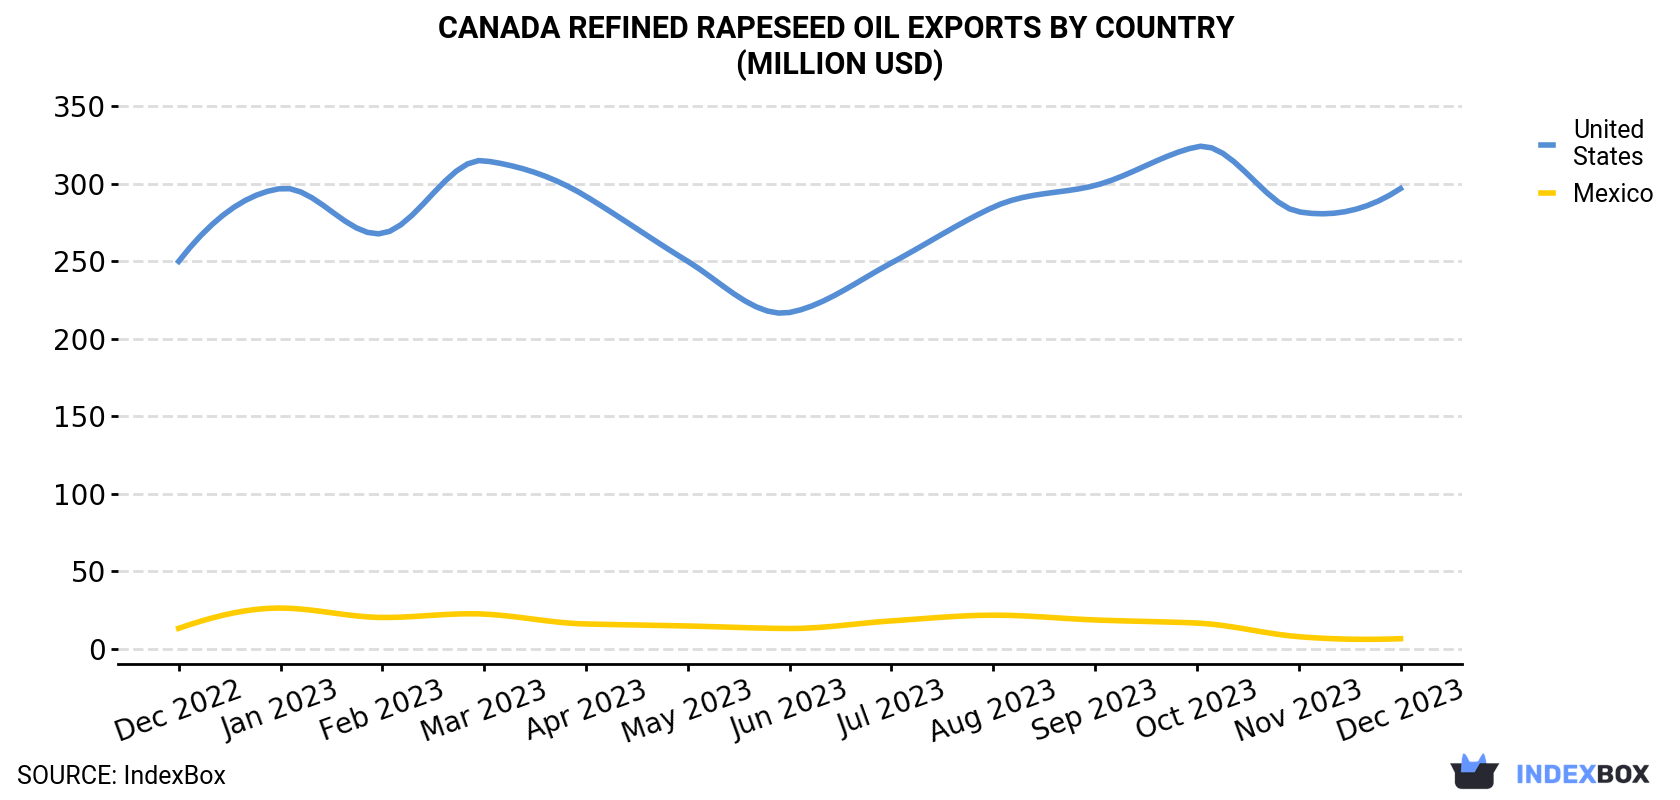 Canada Refined Rapeseed Oil Exports By Country (Million USD)